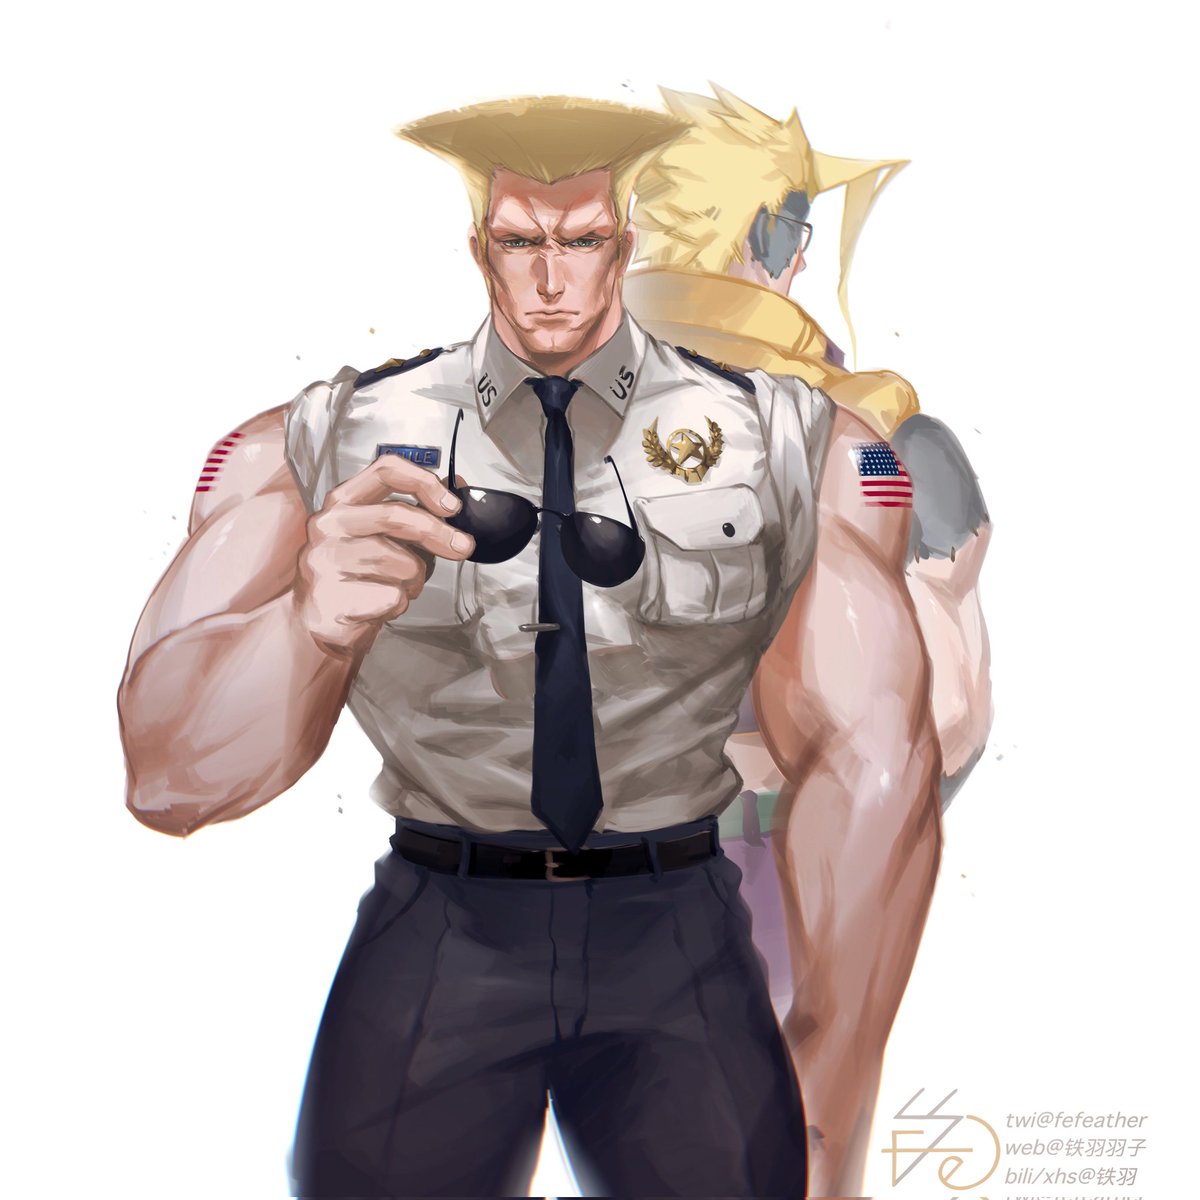 Mutual reliance🤲
#StreetFighter